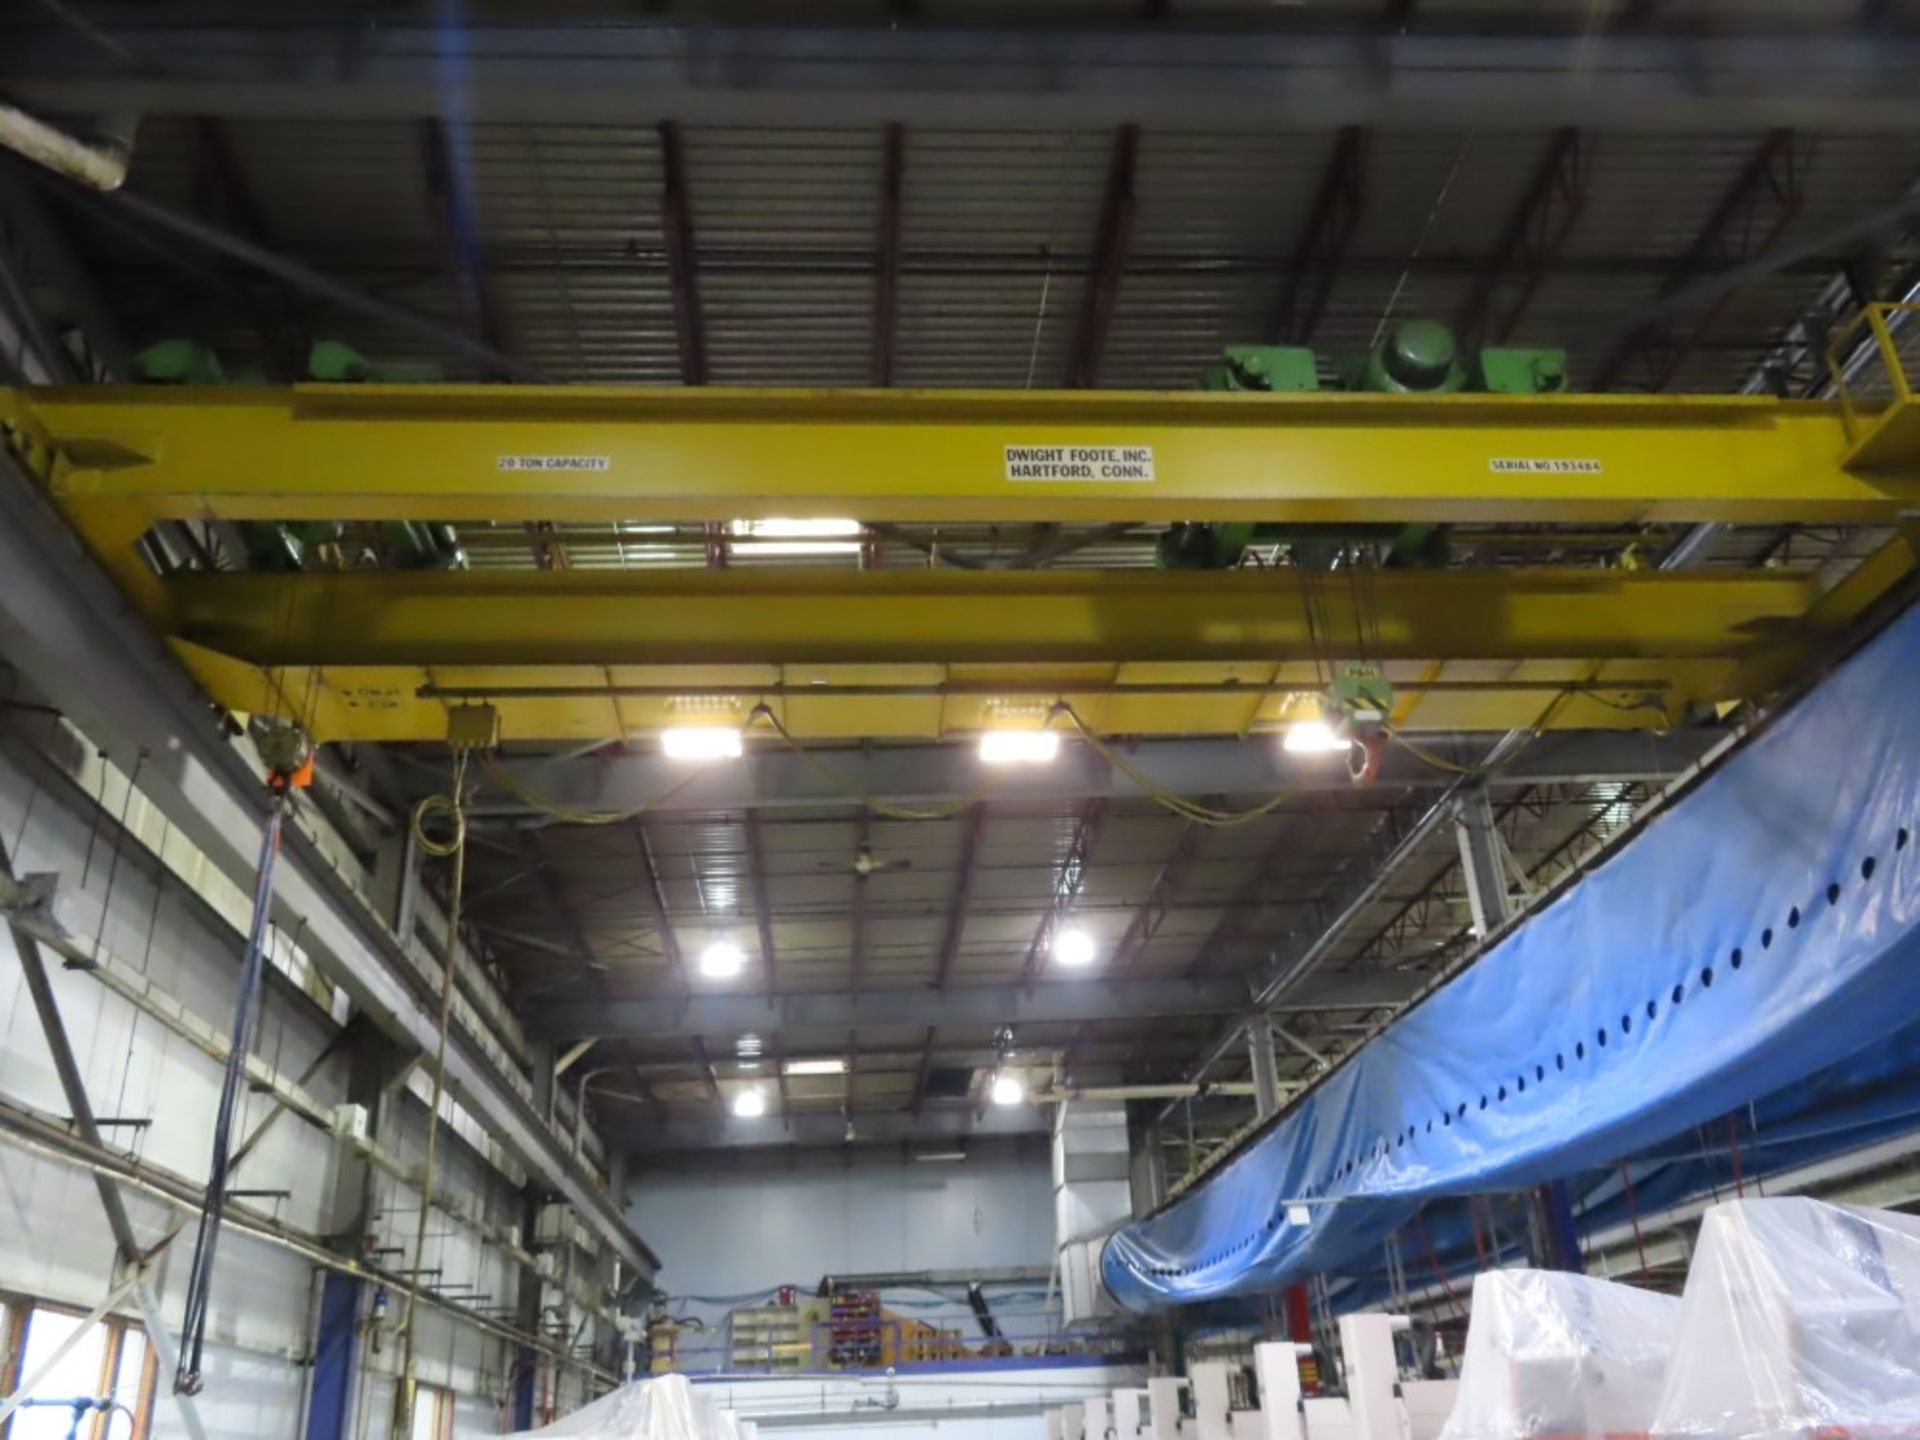 Dwight Foote Top Running 20 Ton Overhead Crane - Image 2 of 3